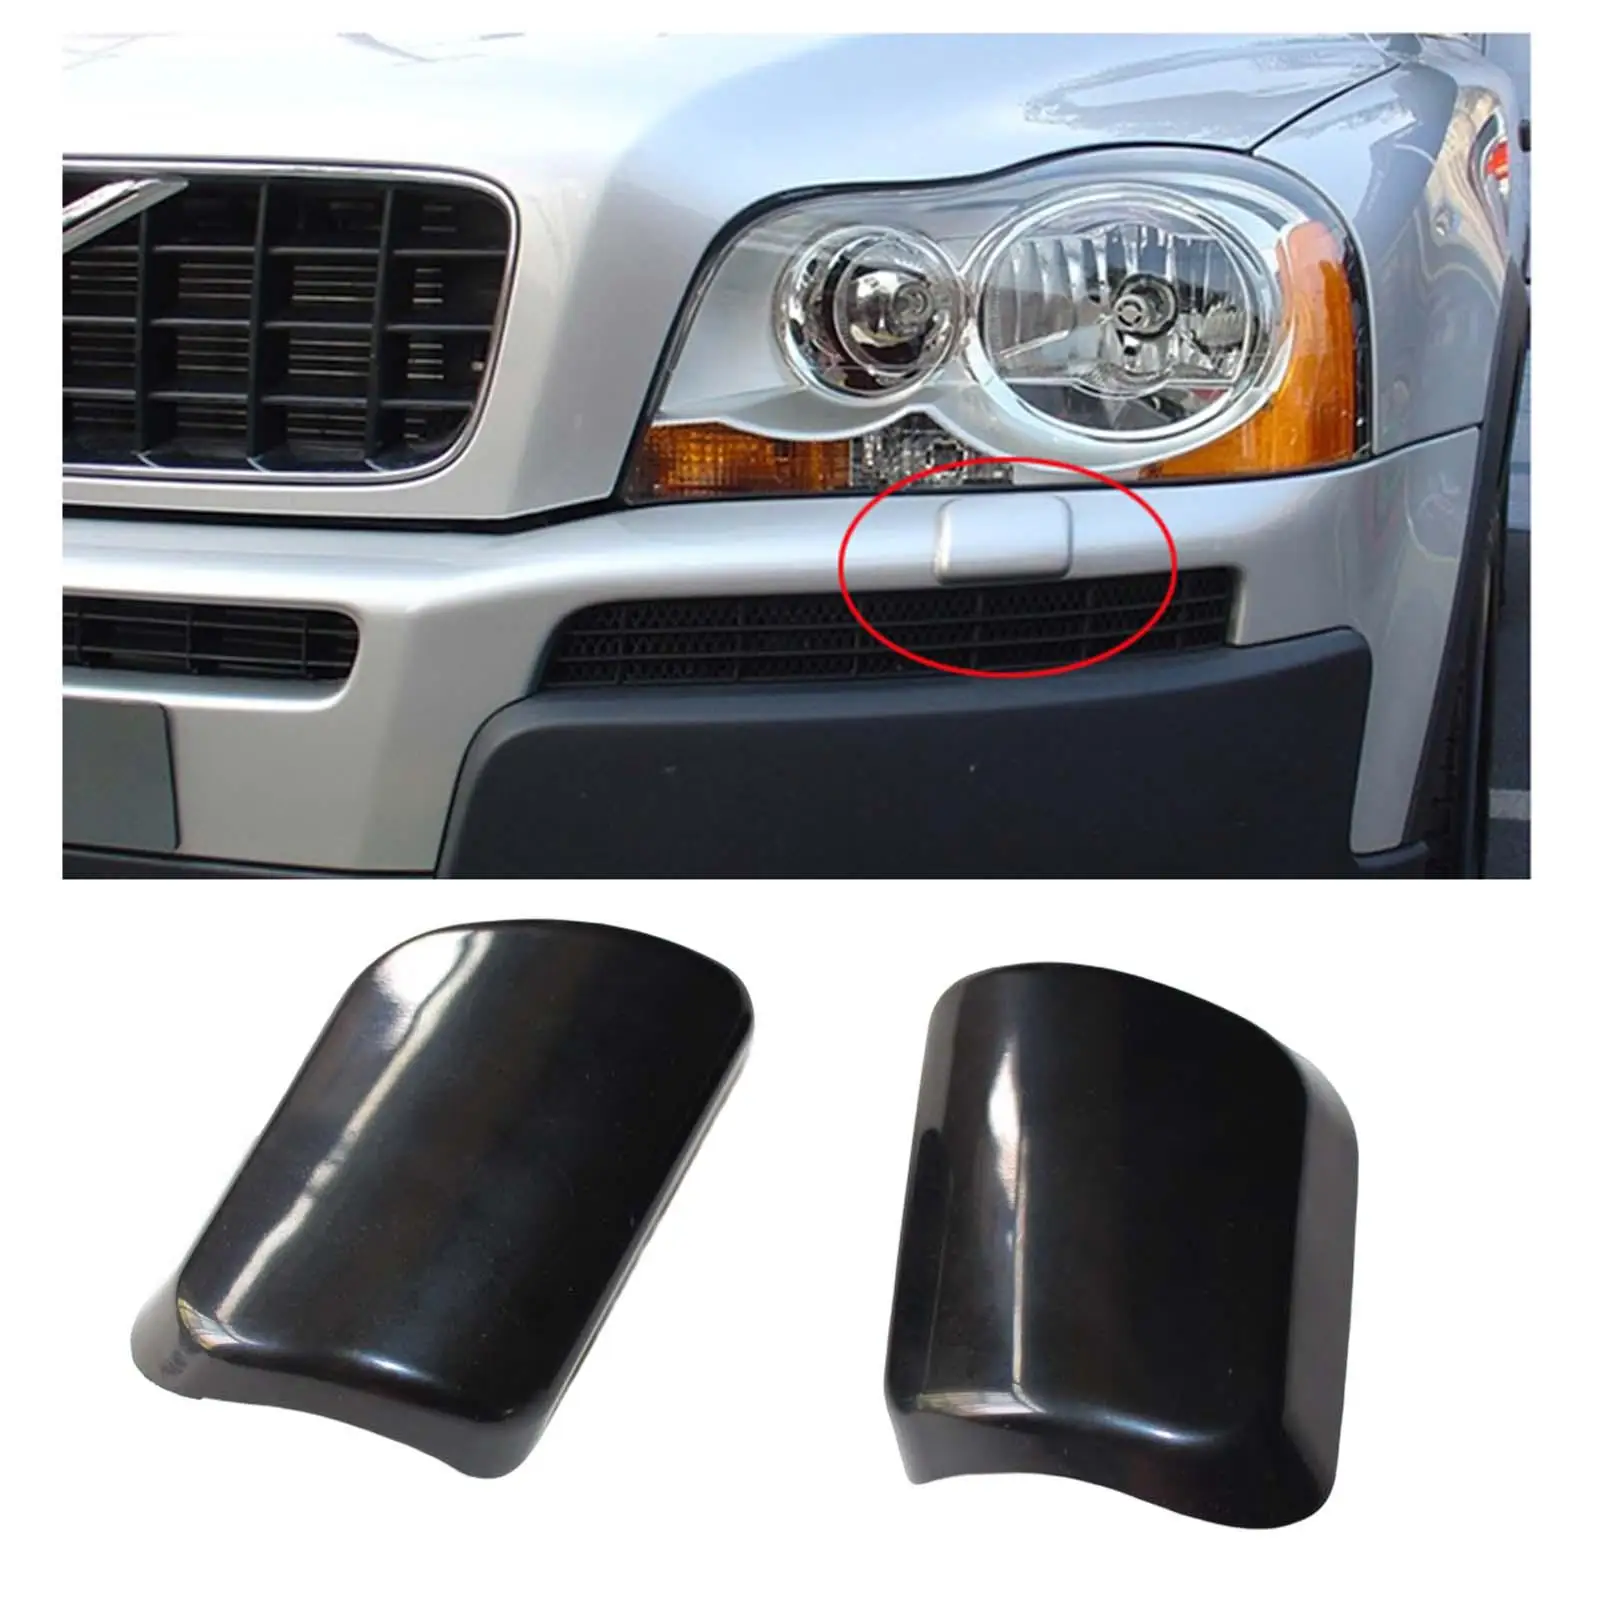 2 x Headlight Washer Covers, Headlamp Spray Cover for Volvo XC90 30698208 , 30698209 Supplies Black